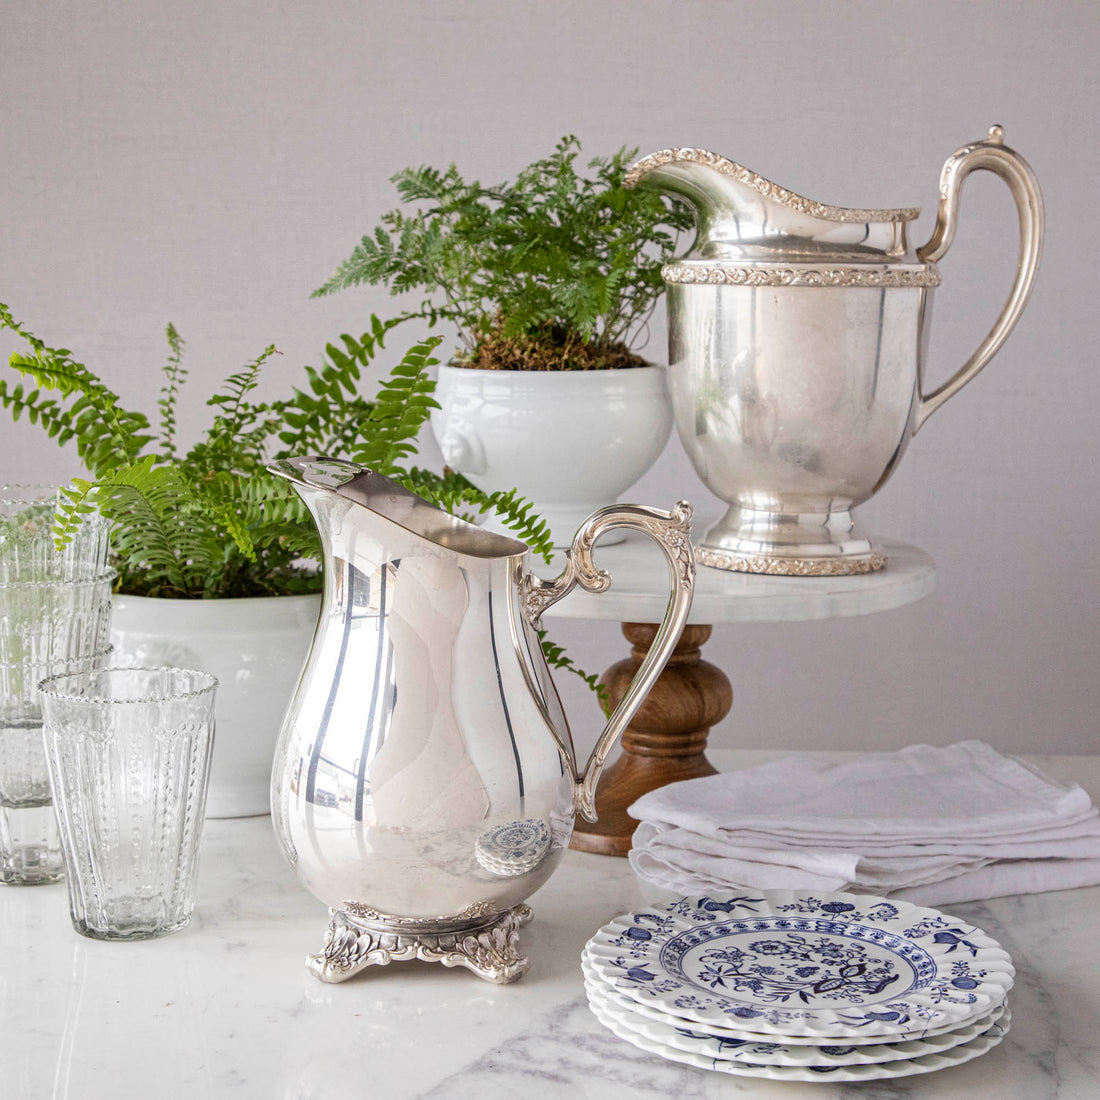 Elegant Hester &amp; Cook vintage silver-plate water pitcher on a table adorned with glasses, plates, and a potted fern in the background.